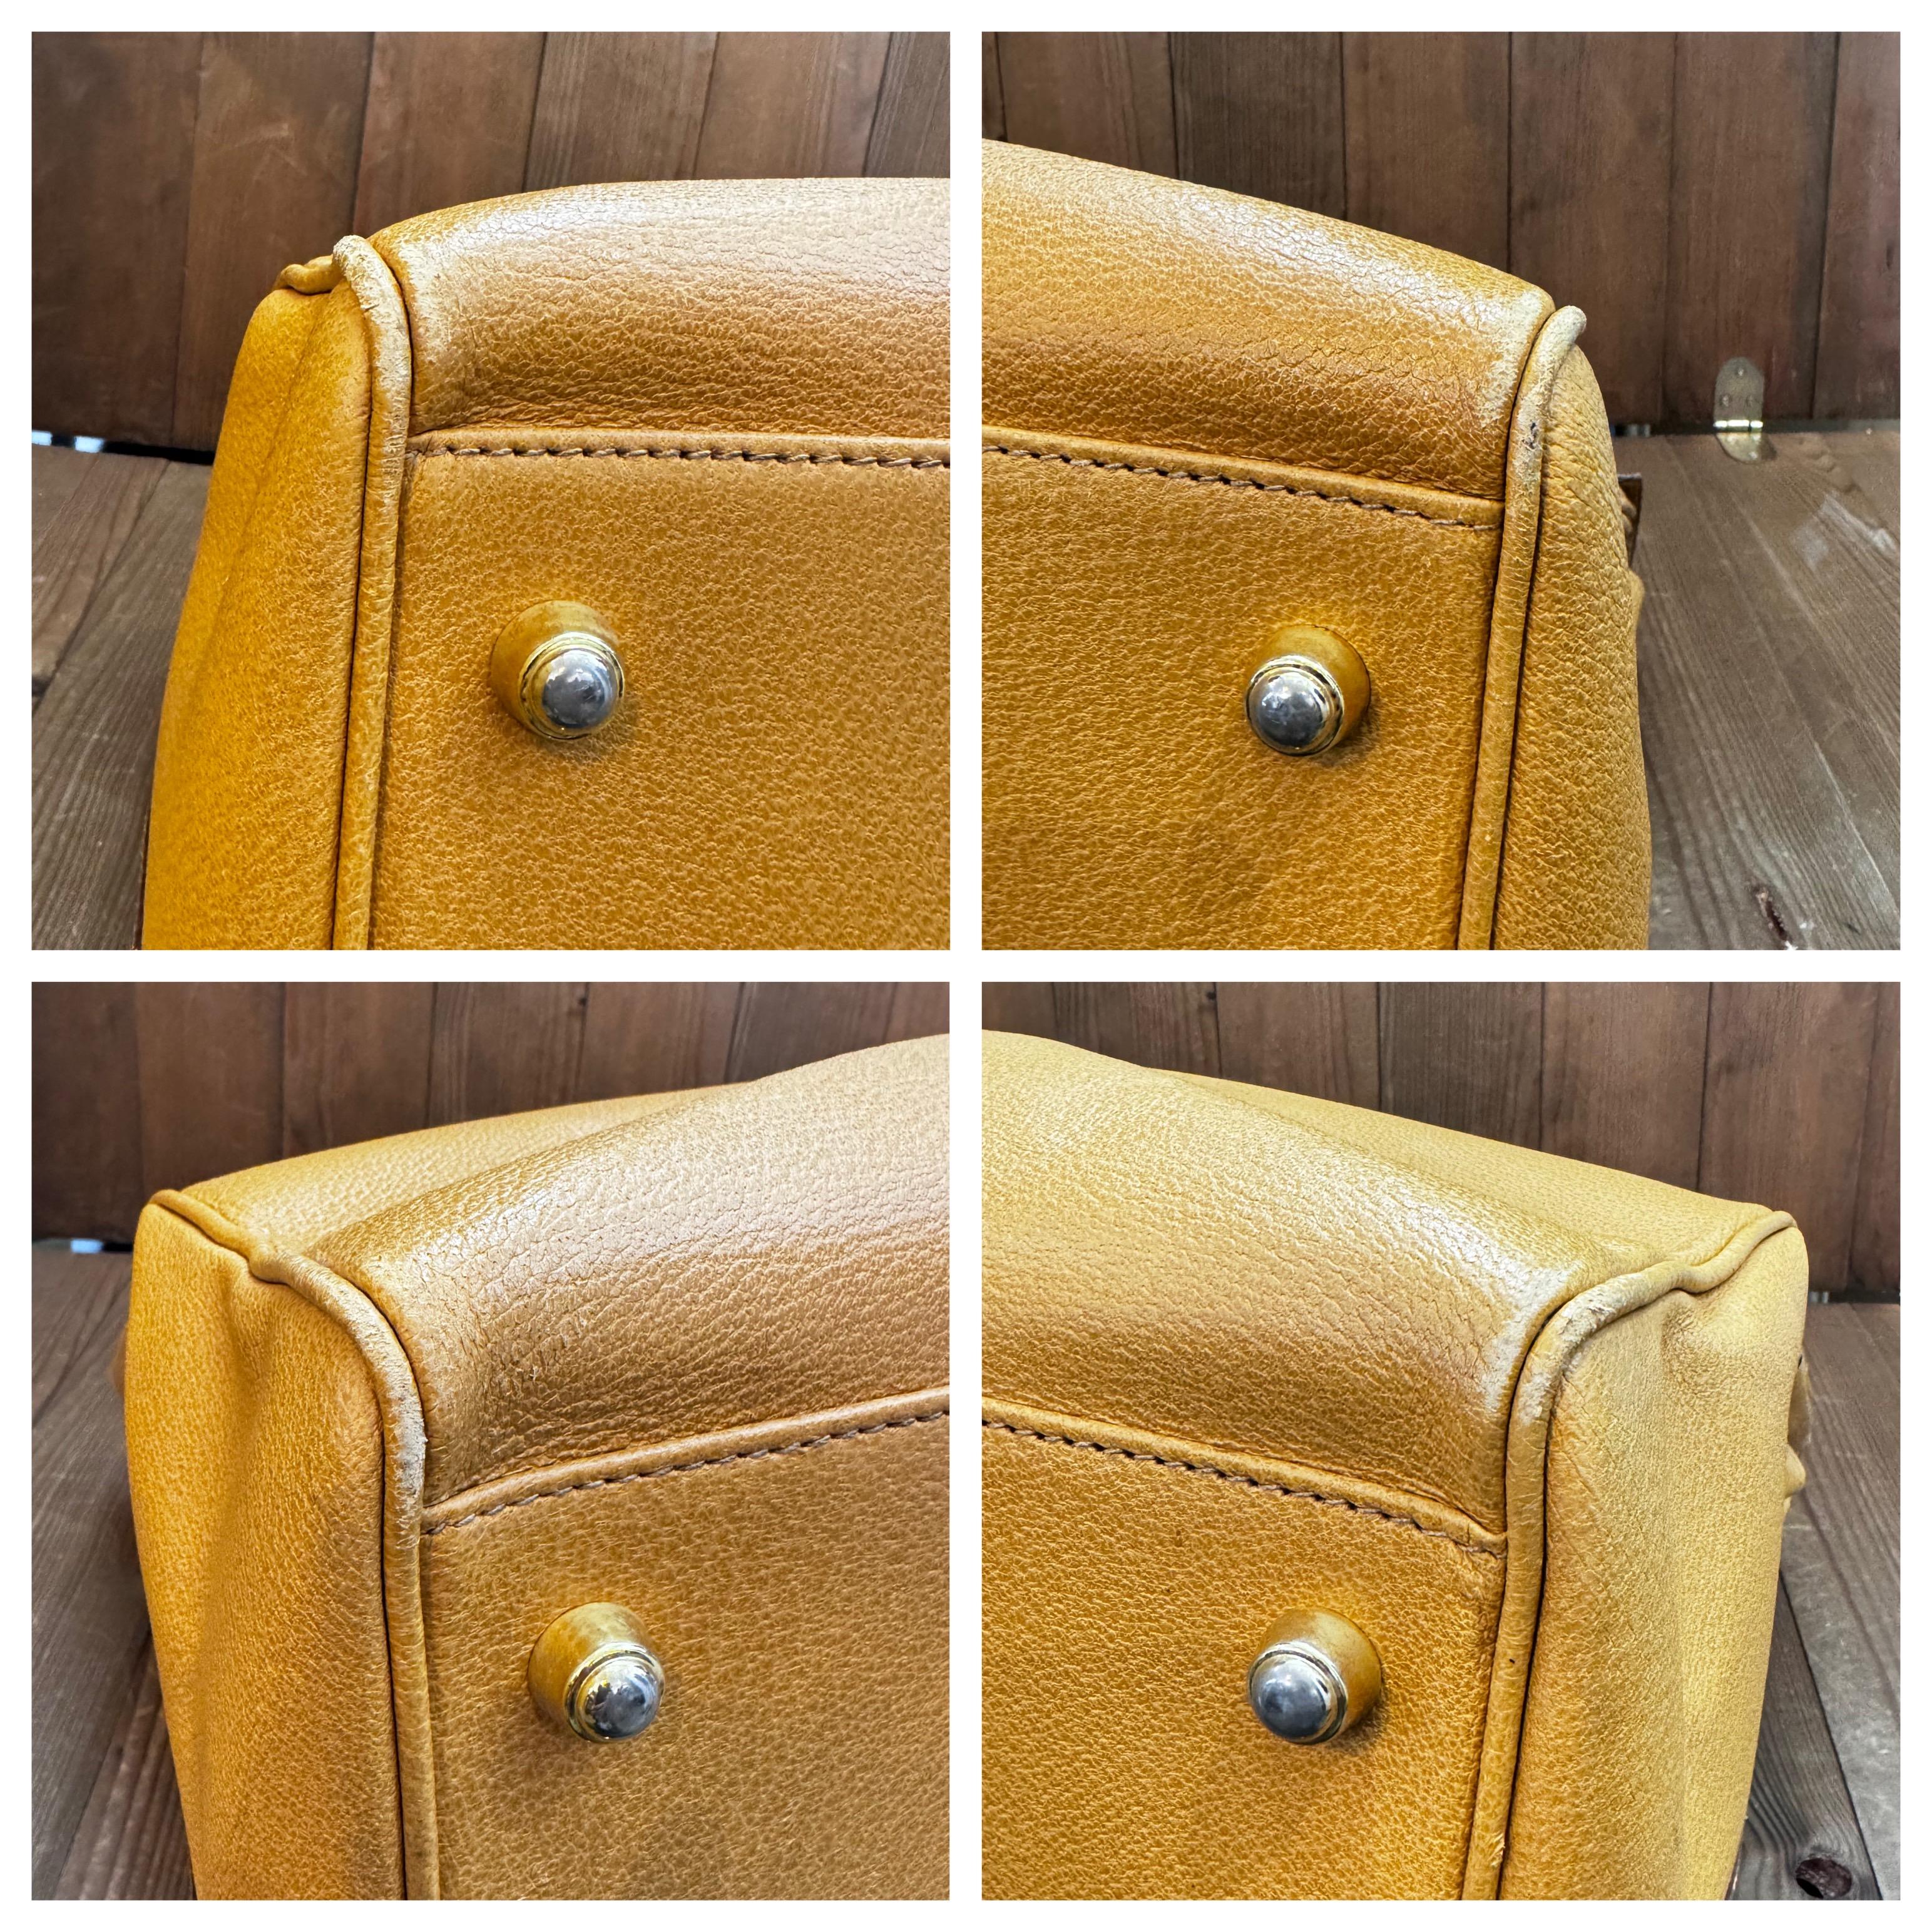 1990s Vintage GUCCI Pigskin Leather Duffle Bag XXL Yellow For Sale 3